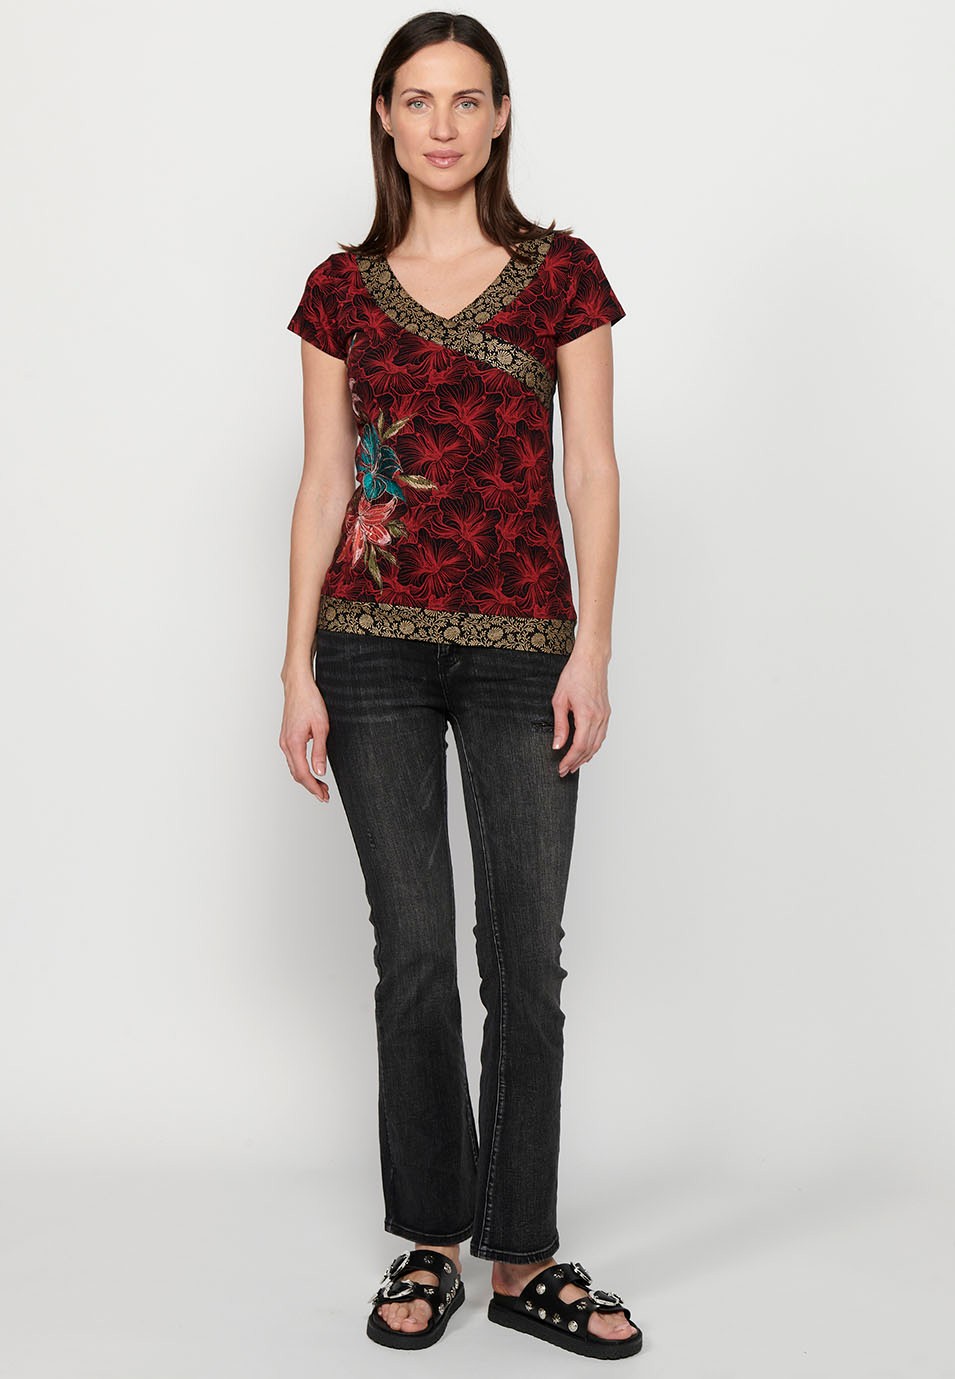 Women's short-sleeved V-neck T-shirt with multicolored floral embroidered details